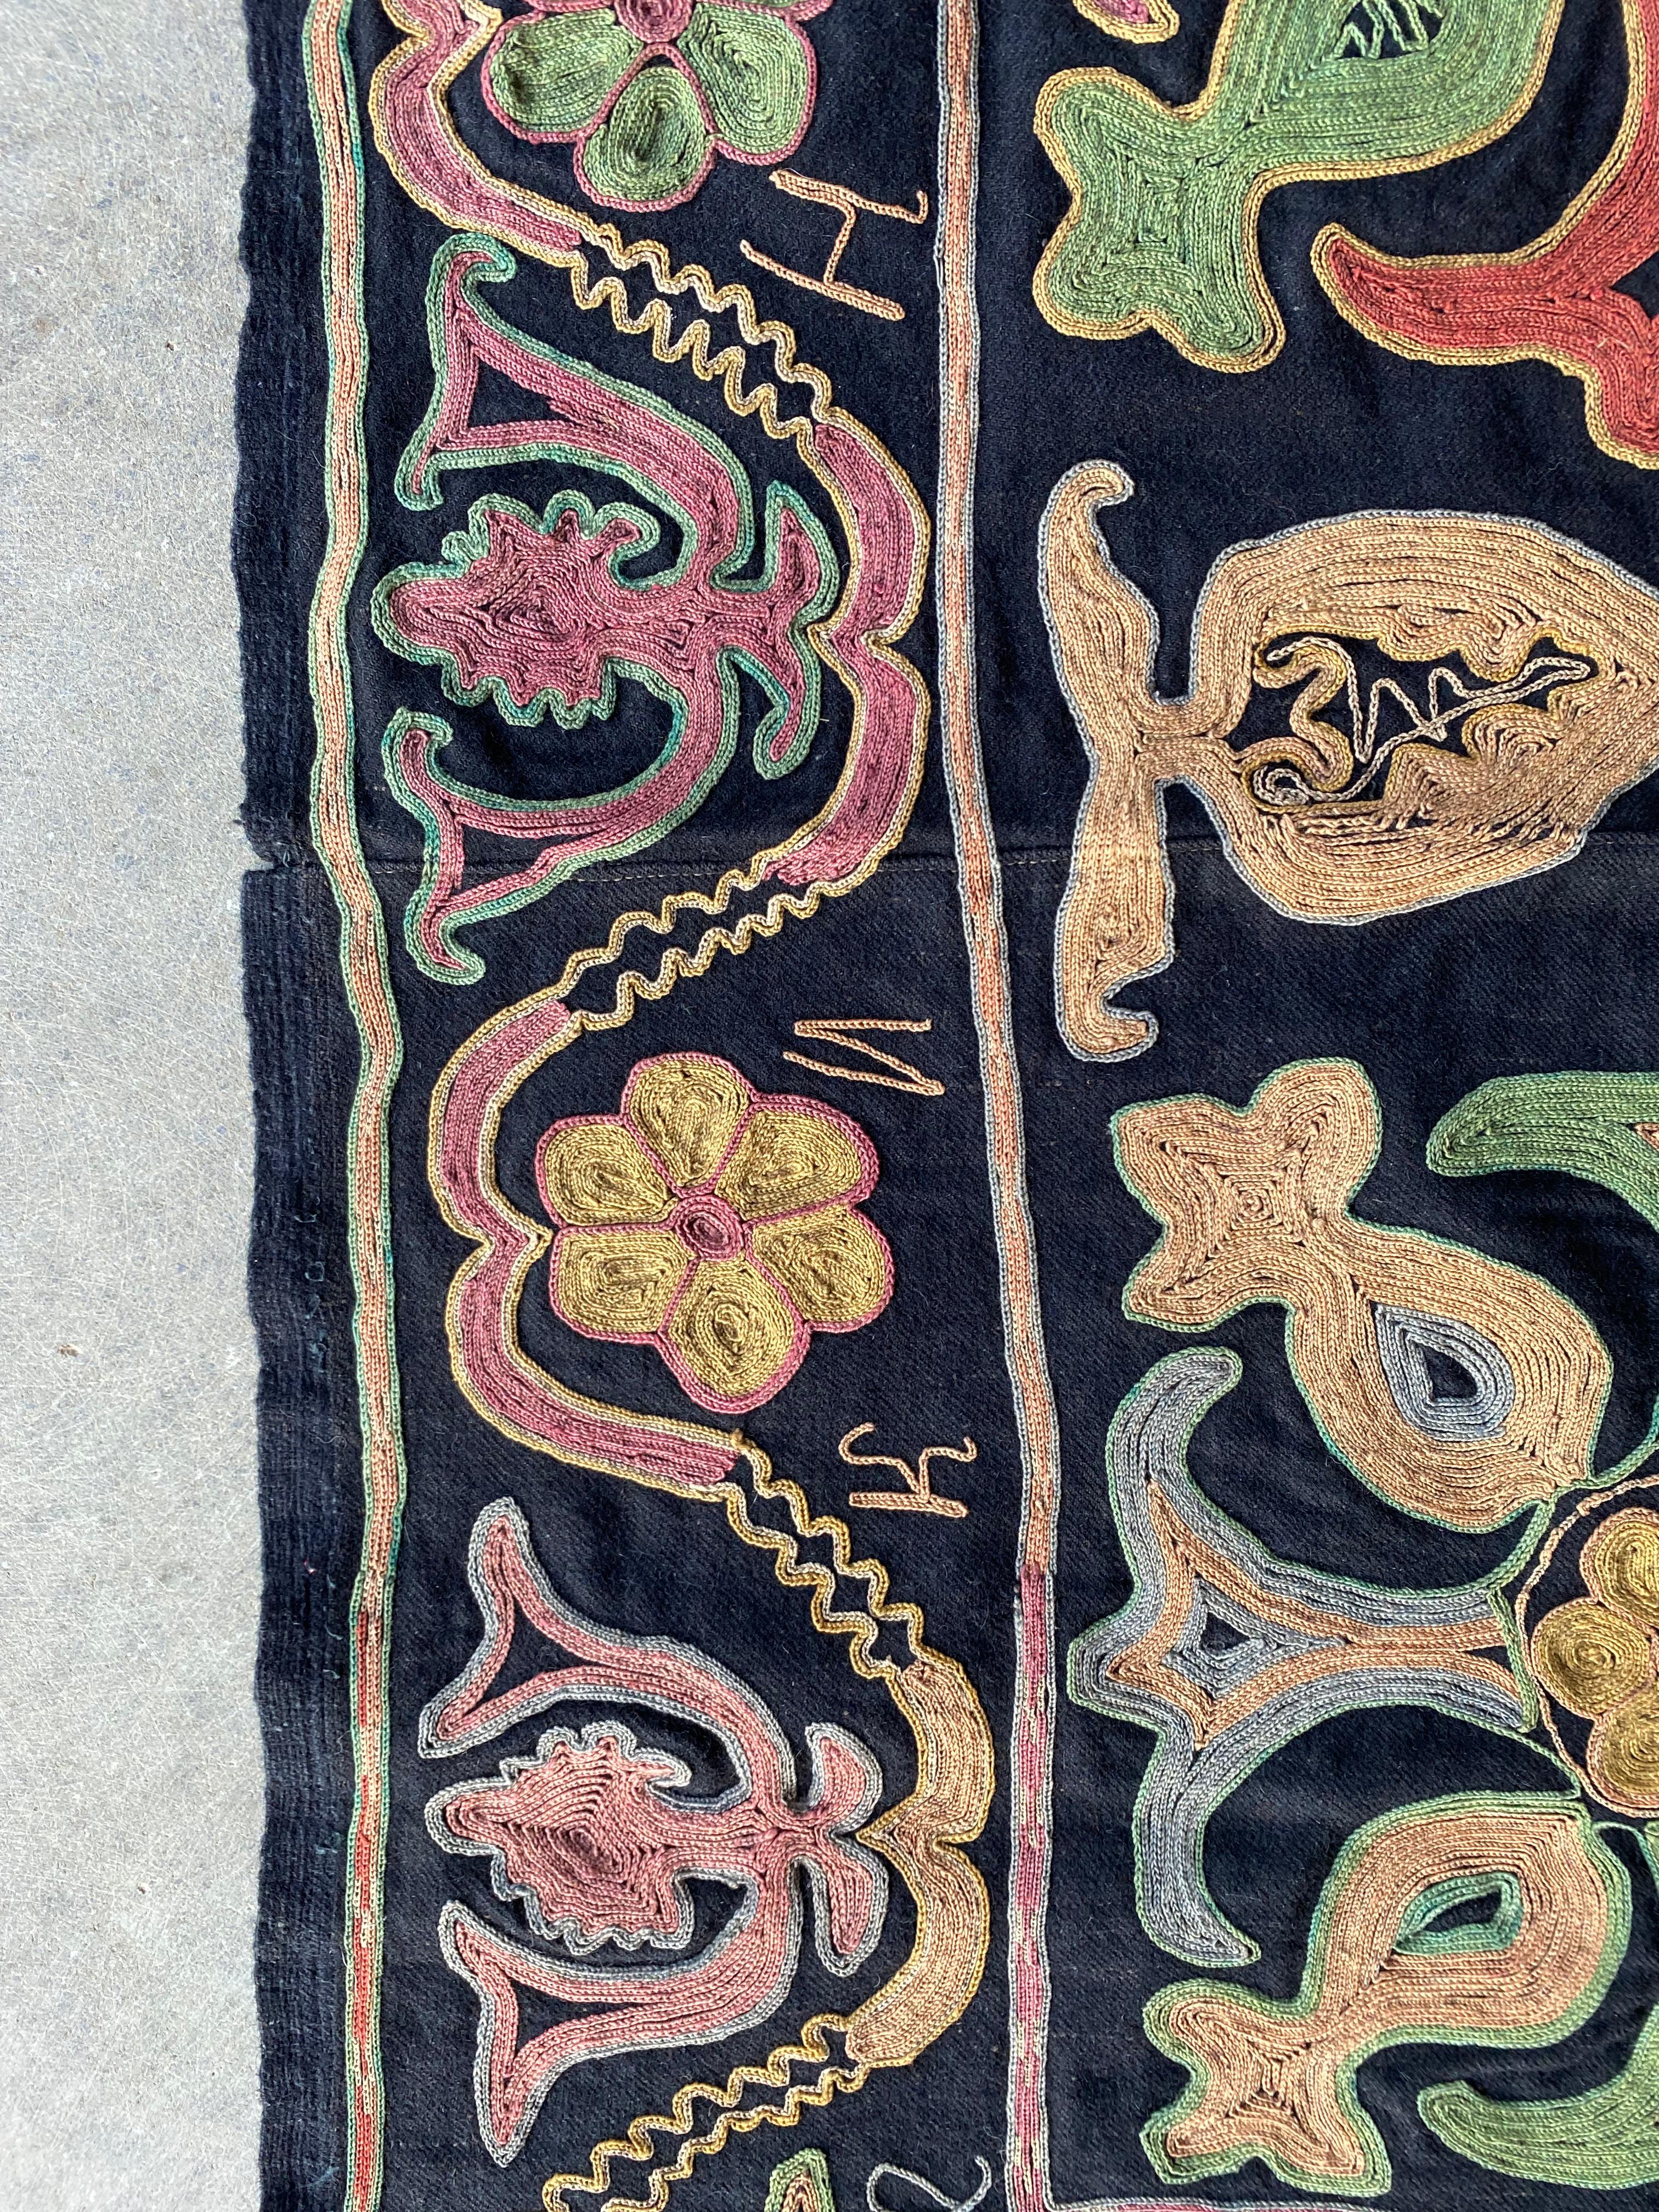 Hand-Woven Central Asian Embroidered Textile, “Suzani”, Mid 20th Century  For Sale